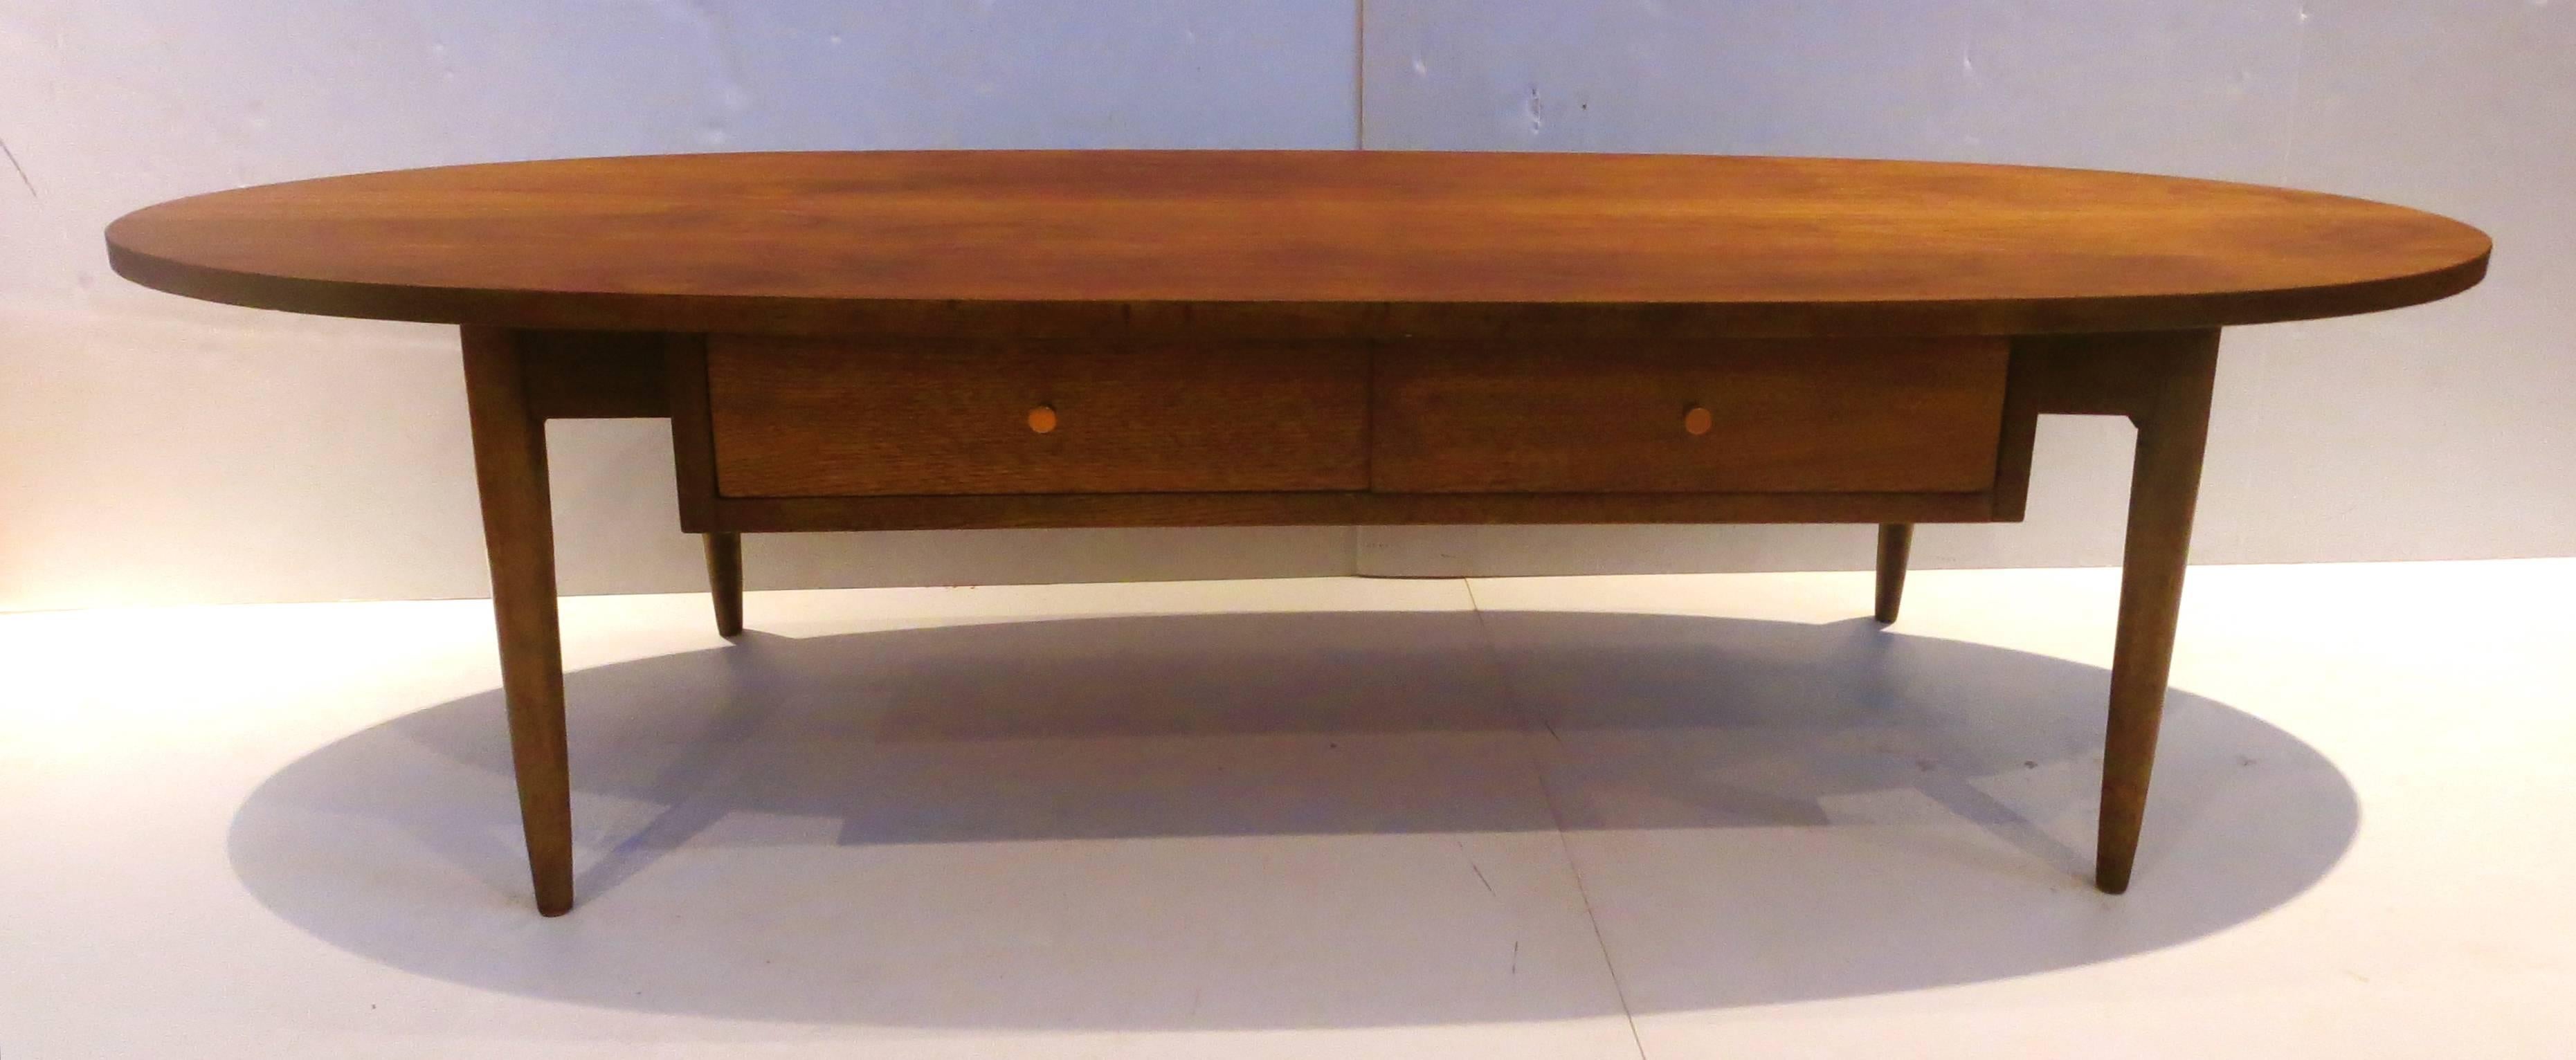 Mid-Century Modern 1950s Atomic Age American Walnut Oval Coffee Table with Brass Knobs